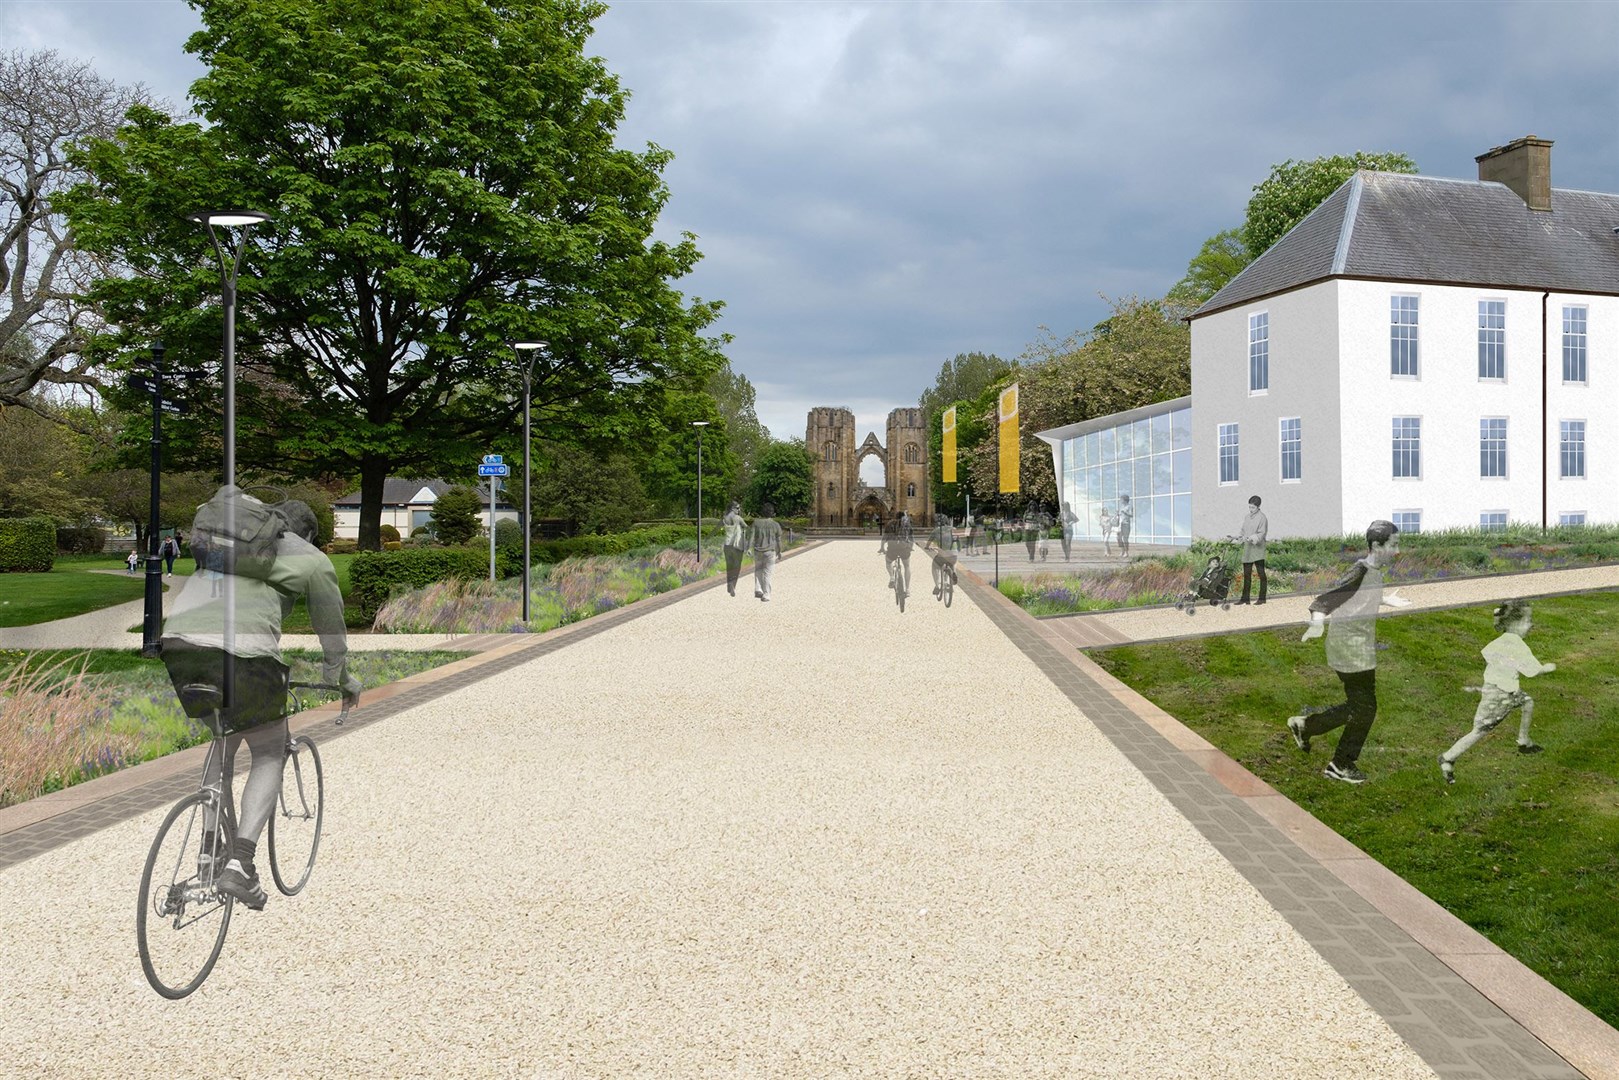 An artist's impression of how Grant Lodge will look after the redevelopment.